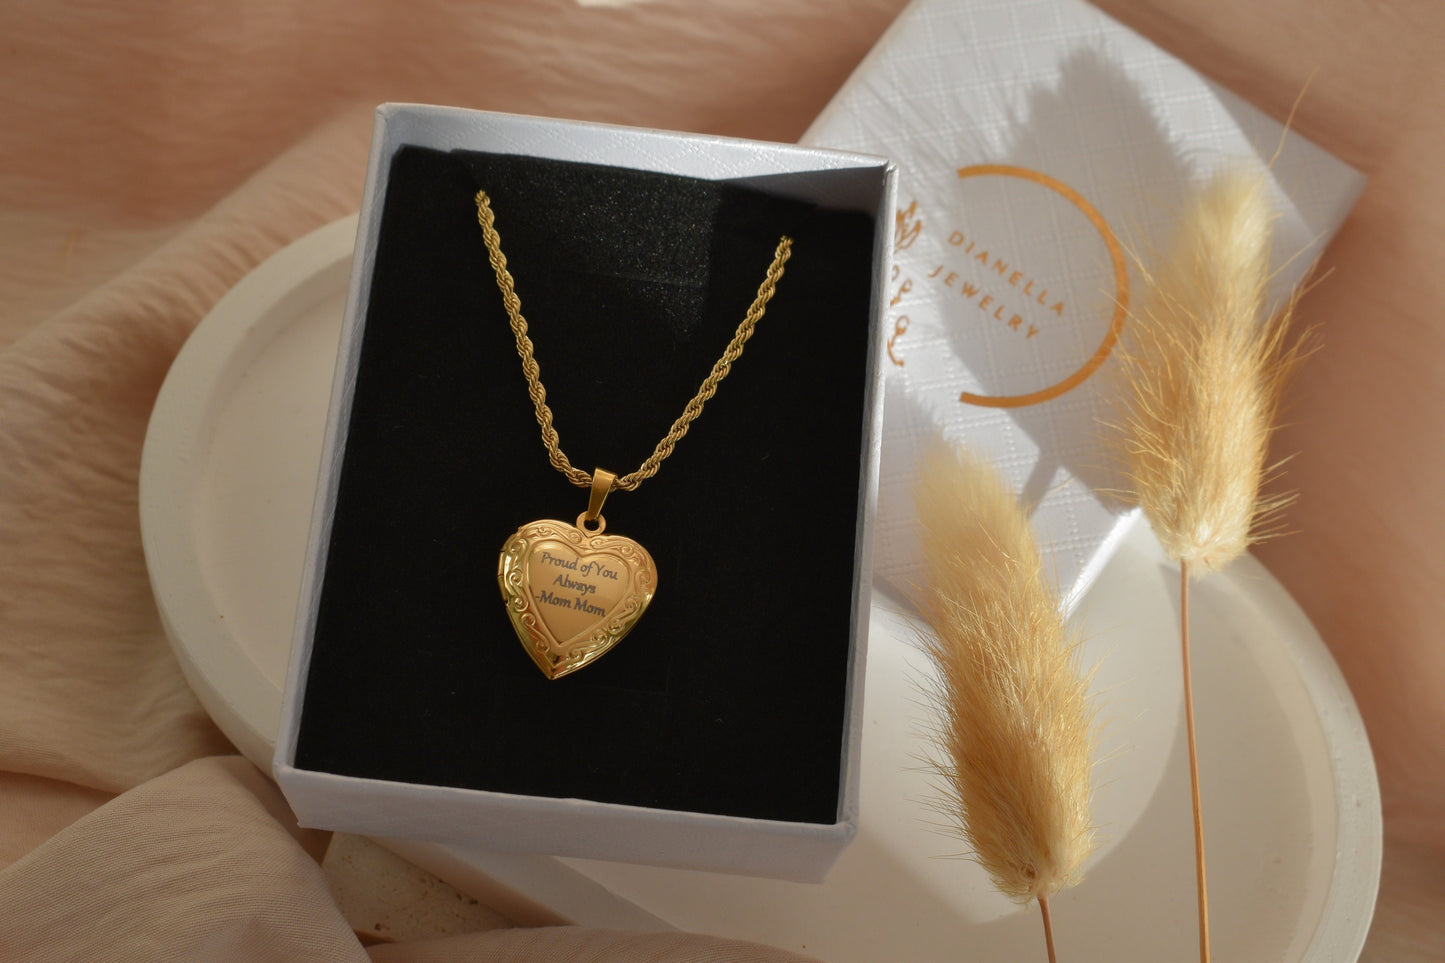 Inspired Lana Del Gold Heart Locket Necklace Best Friend Gift For Her